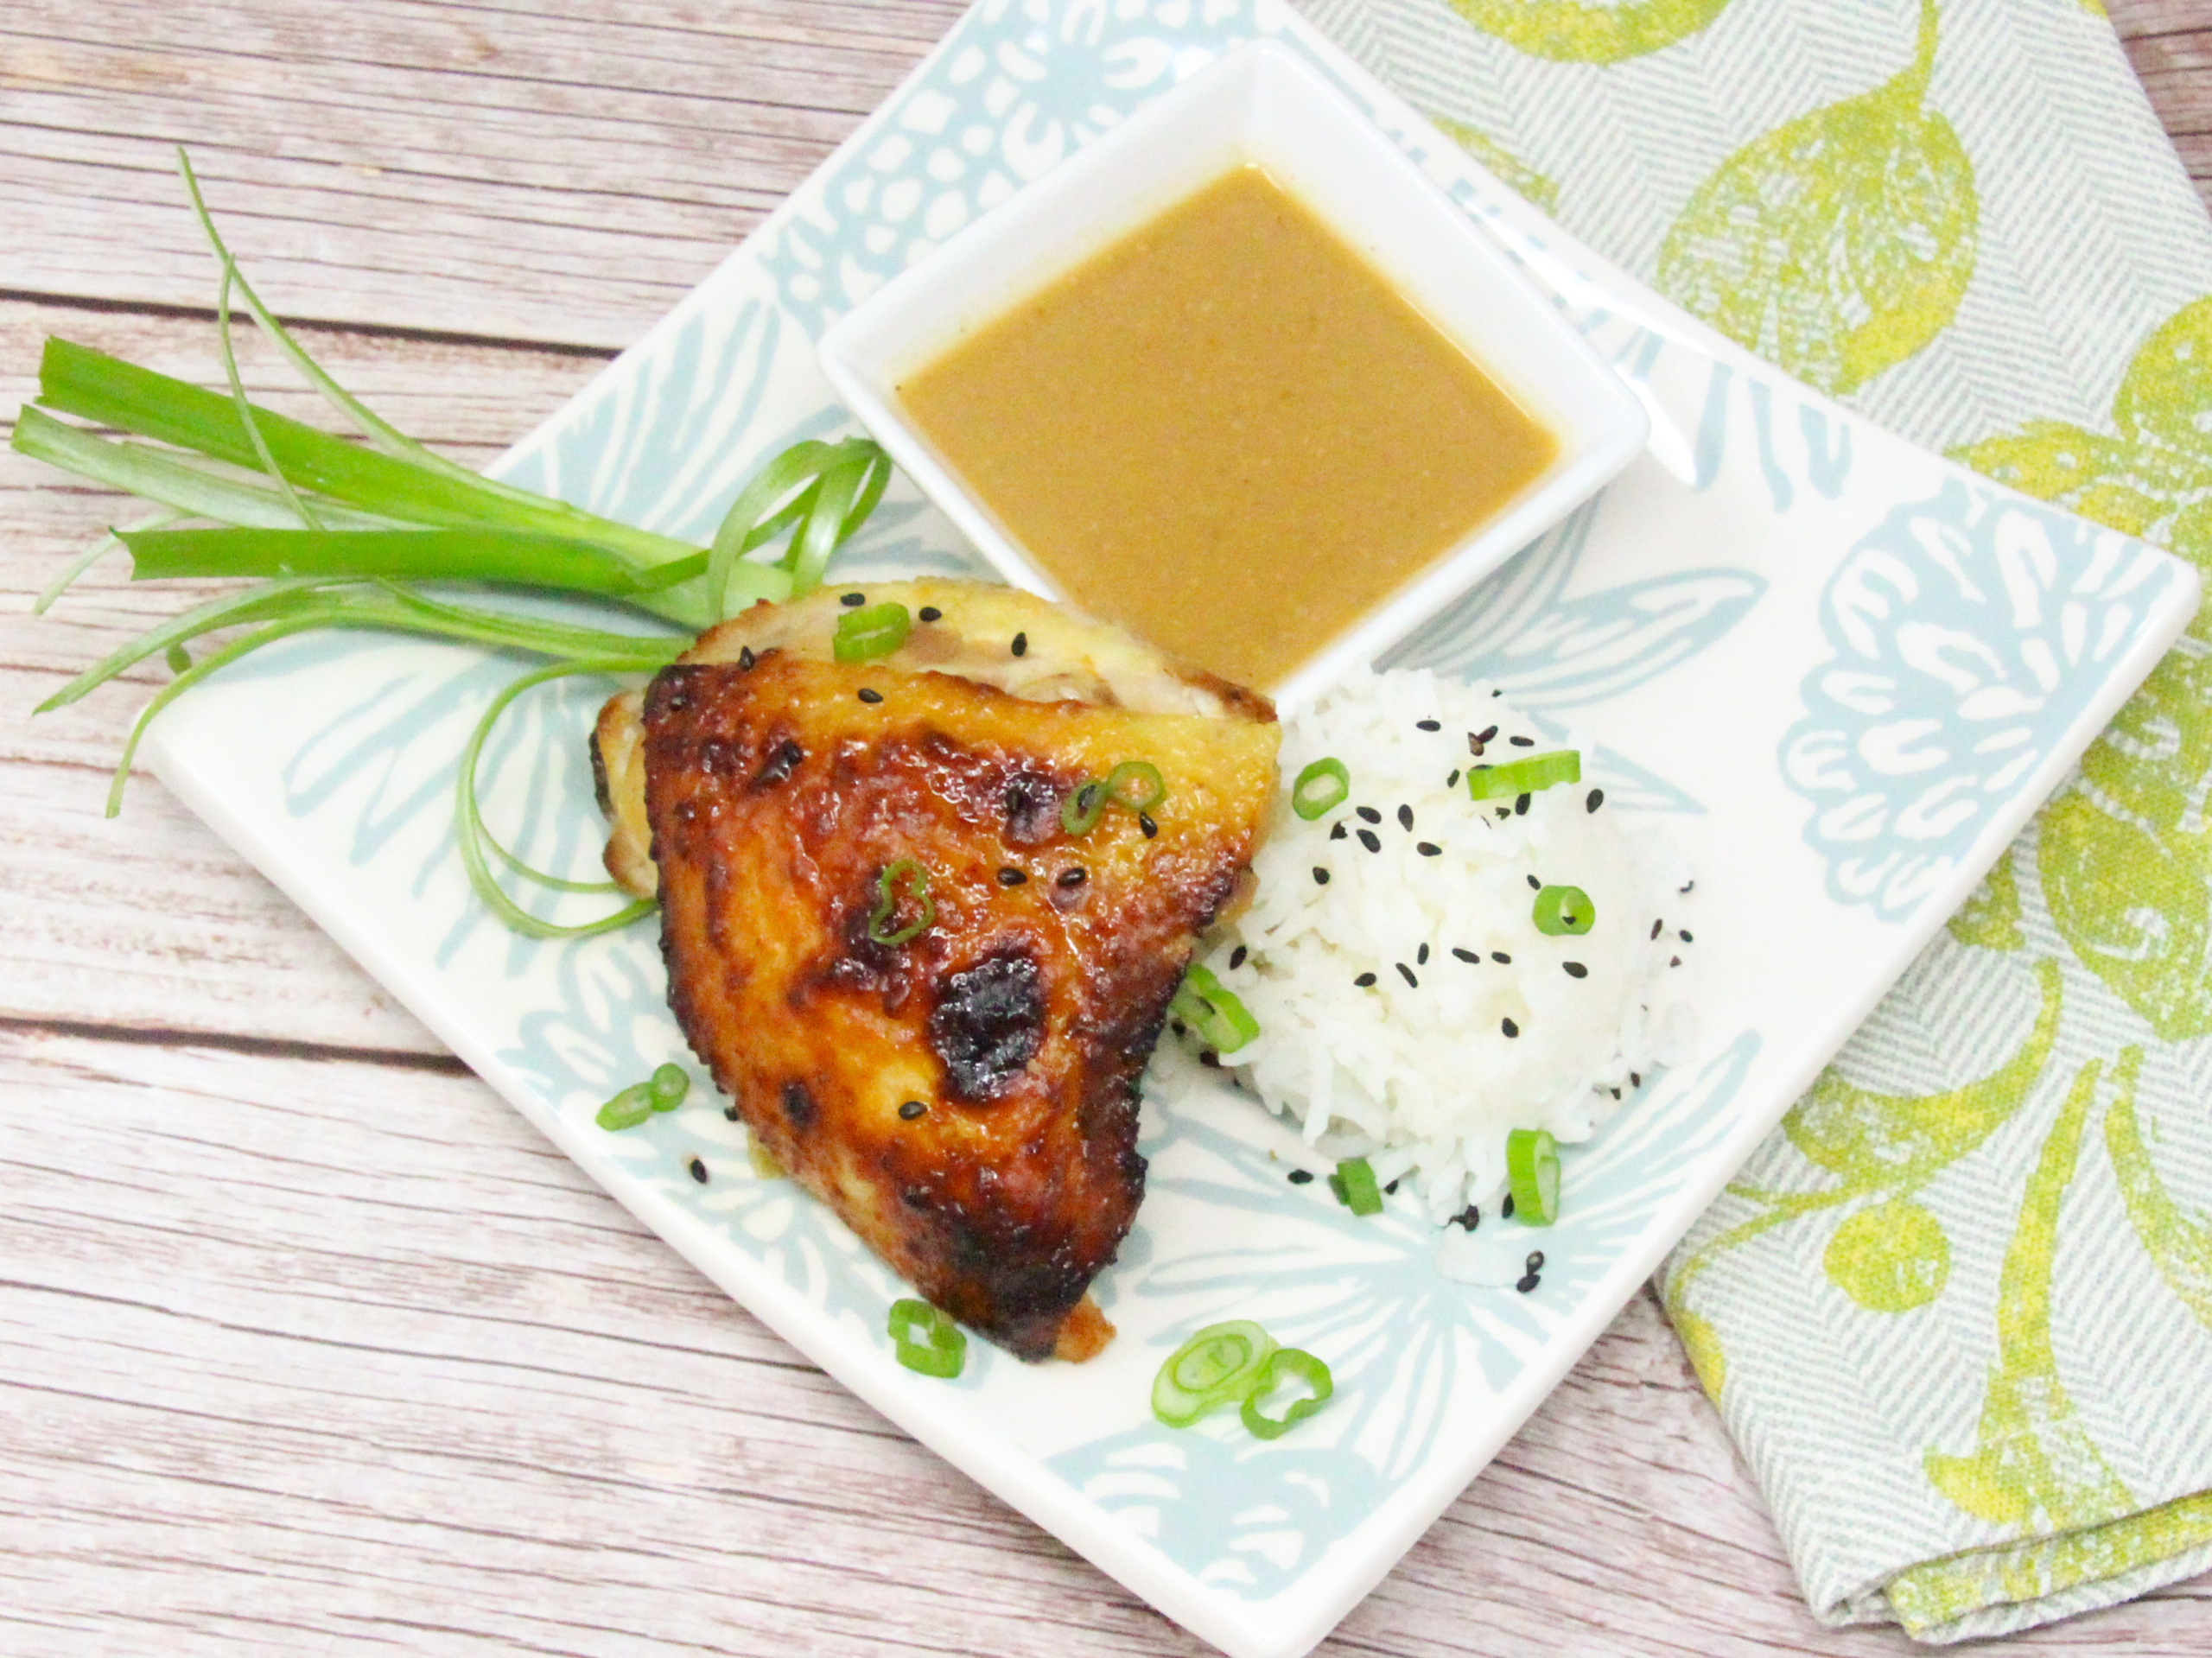 Miso-Sesame Chicken is delicious and flavorful with it's combination of ginger and miso, and a hint of sweetness. Baked or grilled, this is sure to become a staple in your dinner rotation. Recipe shared with permission granted by Leslie Karst, author of Molten Death. 